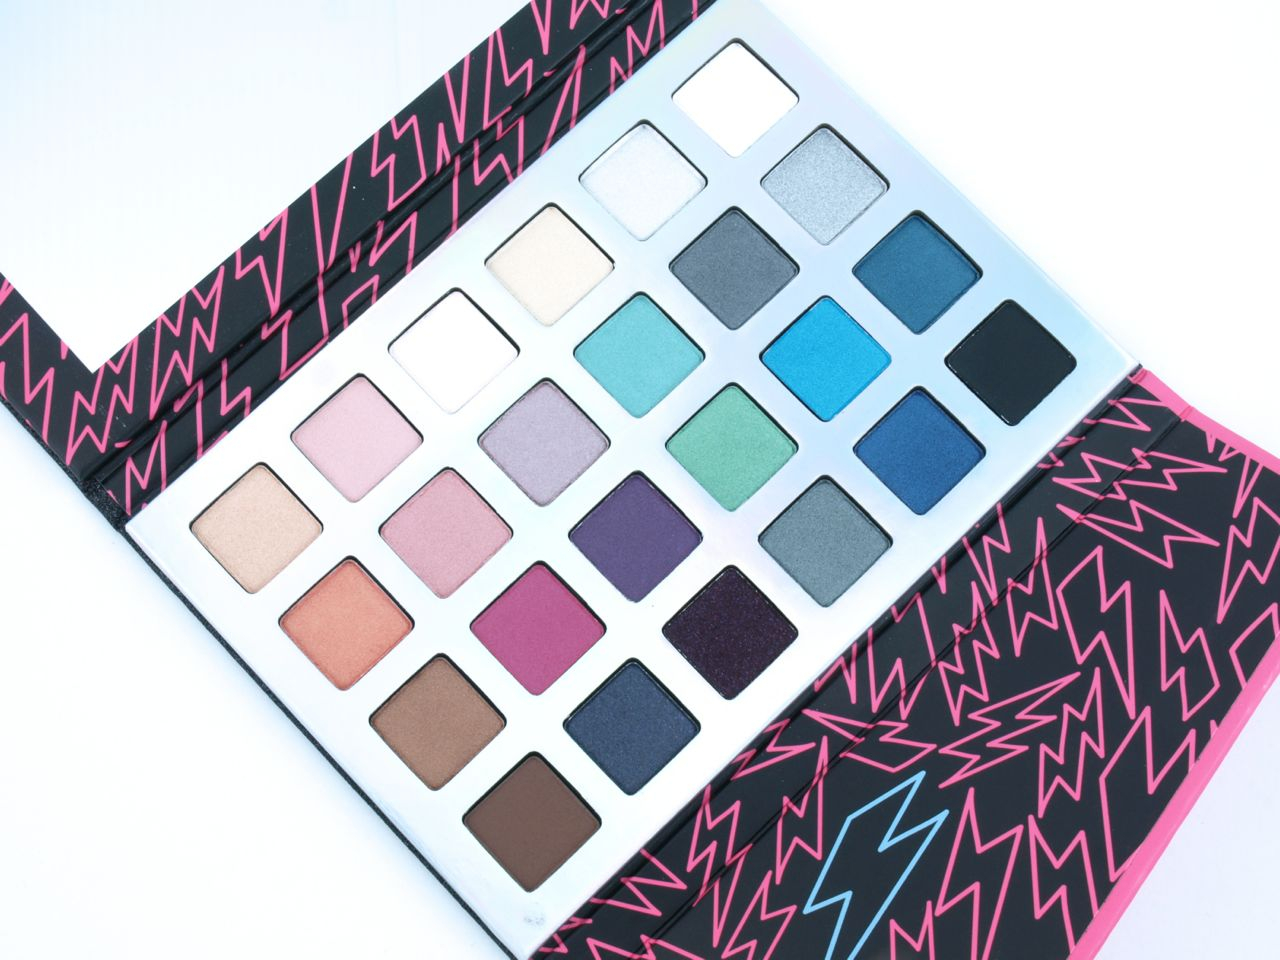 Outrageous Eye Makeup Sephora Jem And The Holograms Truly Outrageous Eyeshadow Palette